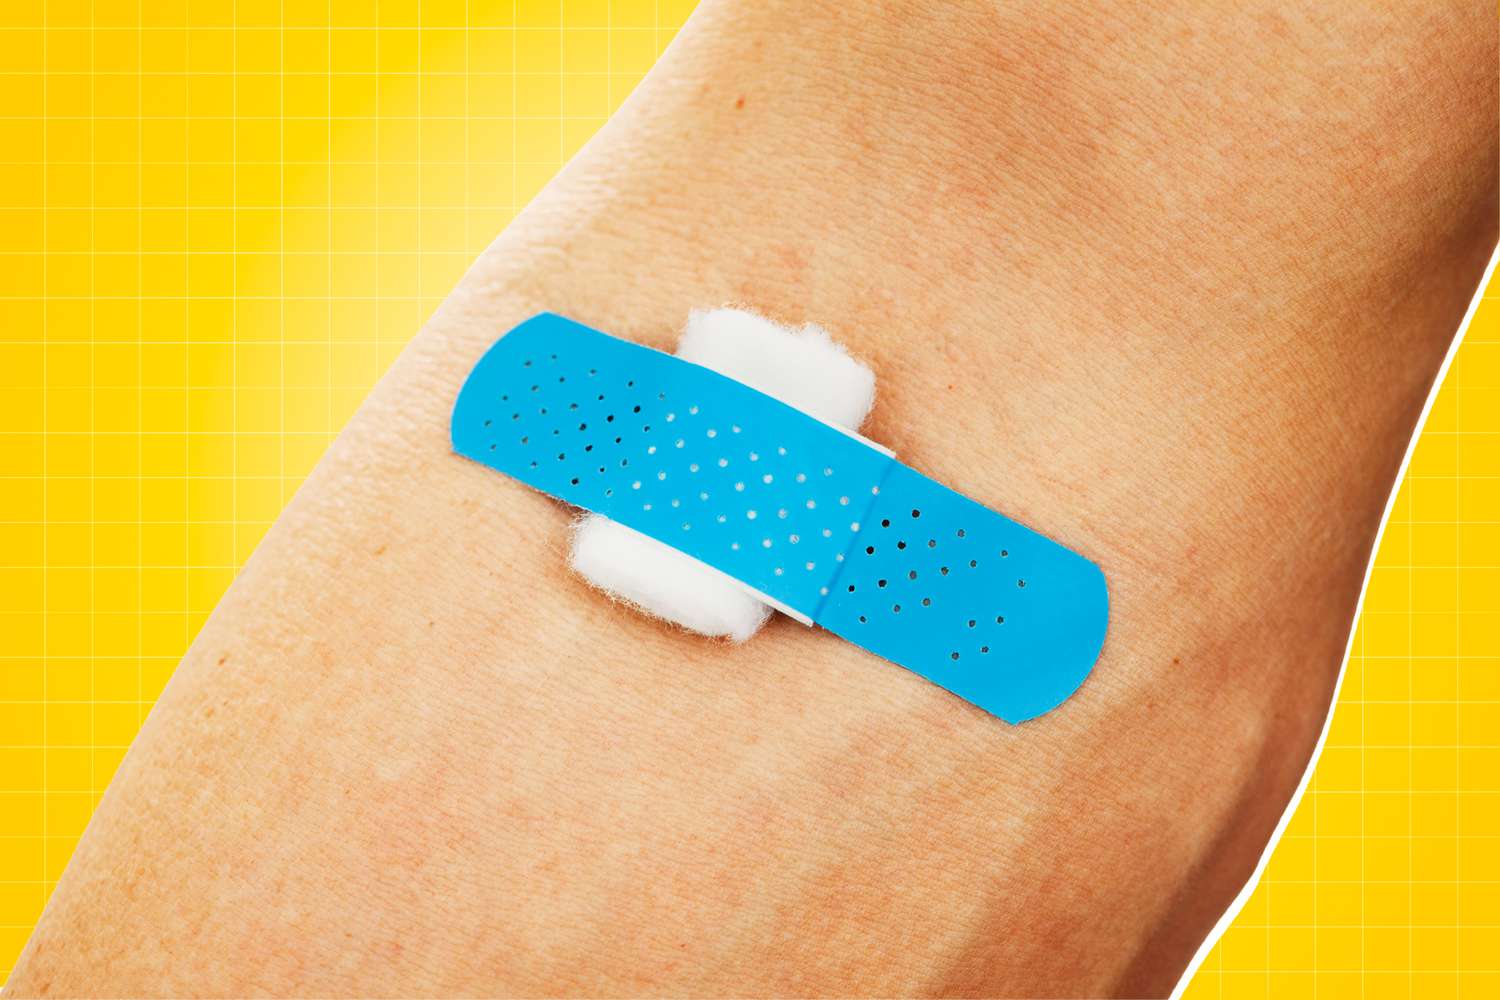 Bandage and gauze on an arm after a blood test or shot isolated on a designed background